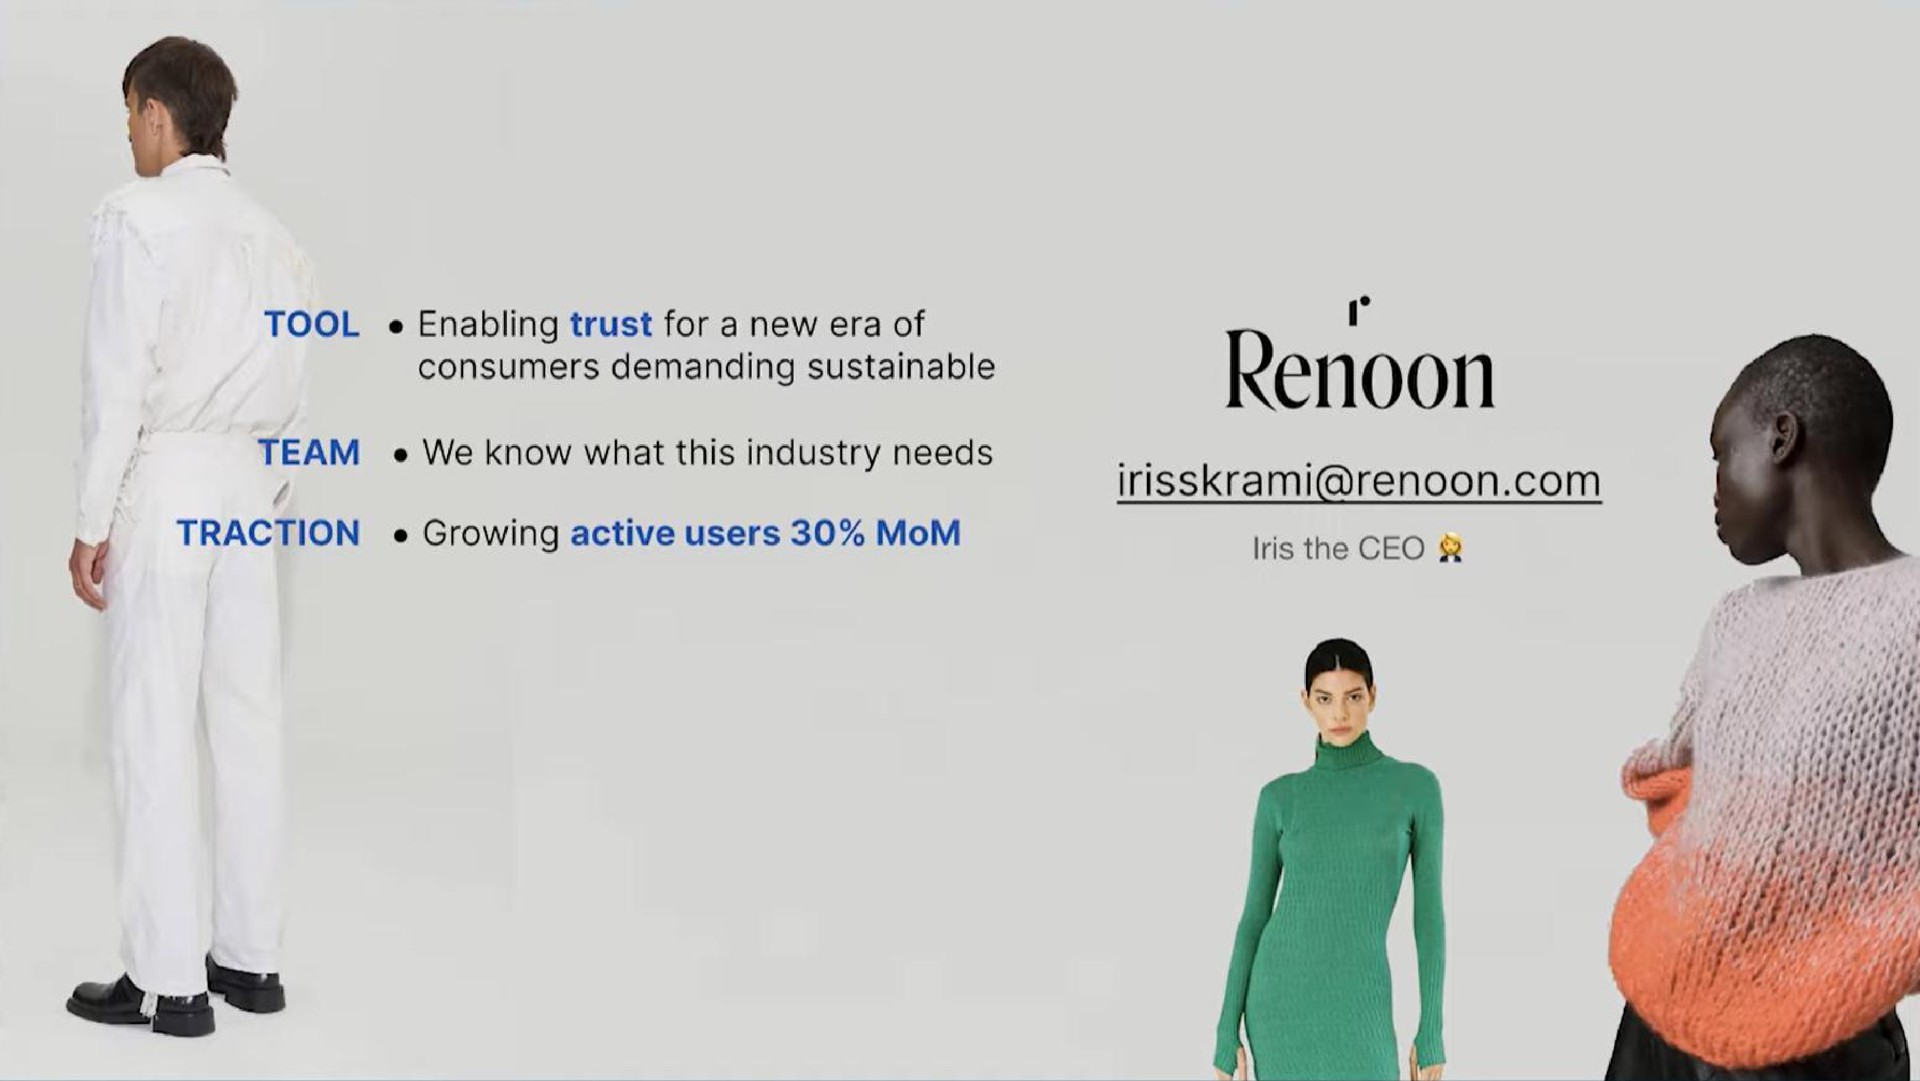 tool enabling trust for a new era of consumers demanding sustainable traction growing active users | Renoon